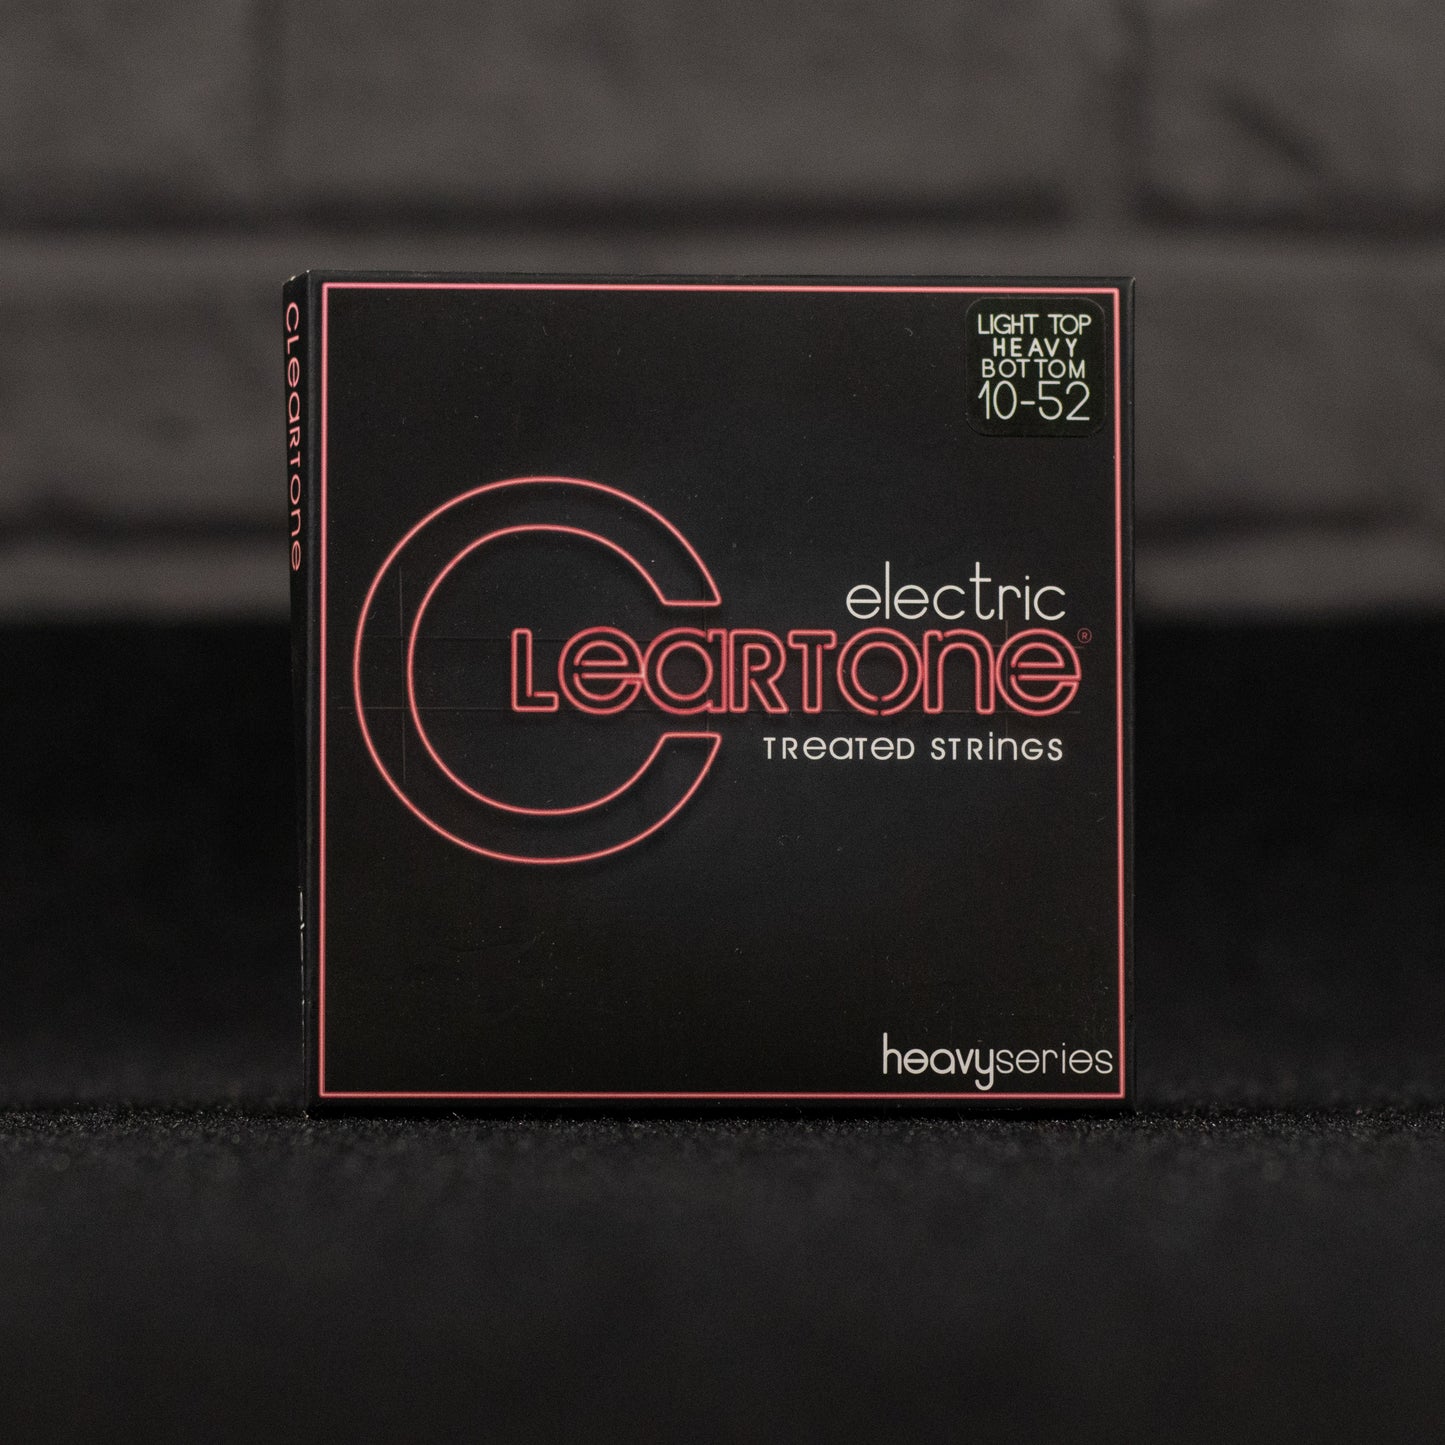 CLEARTONE 1052 HEAVY ELECTRIC GUITAR STRINGS 9520